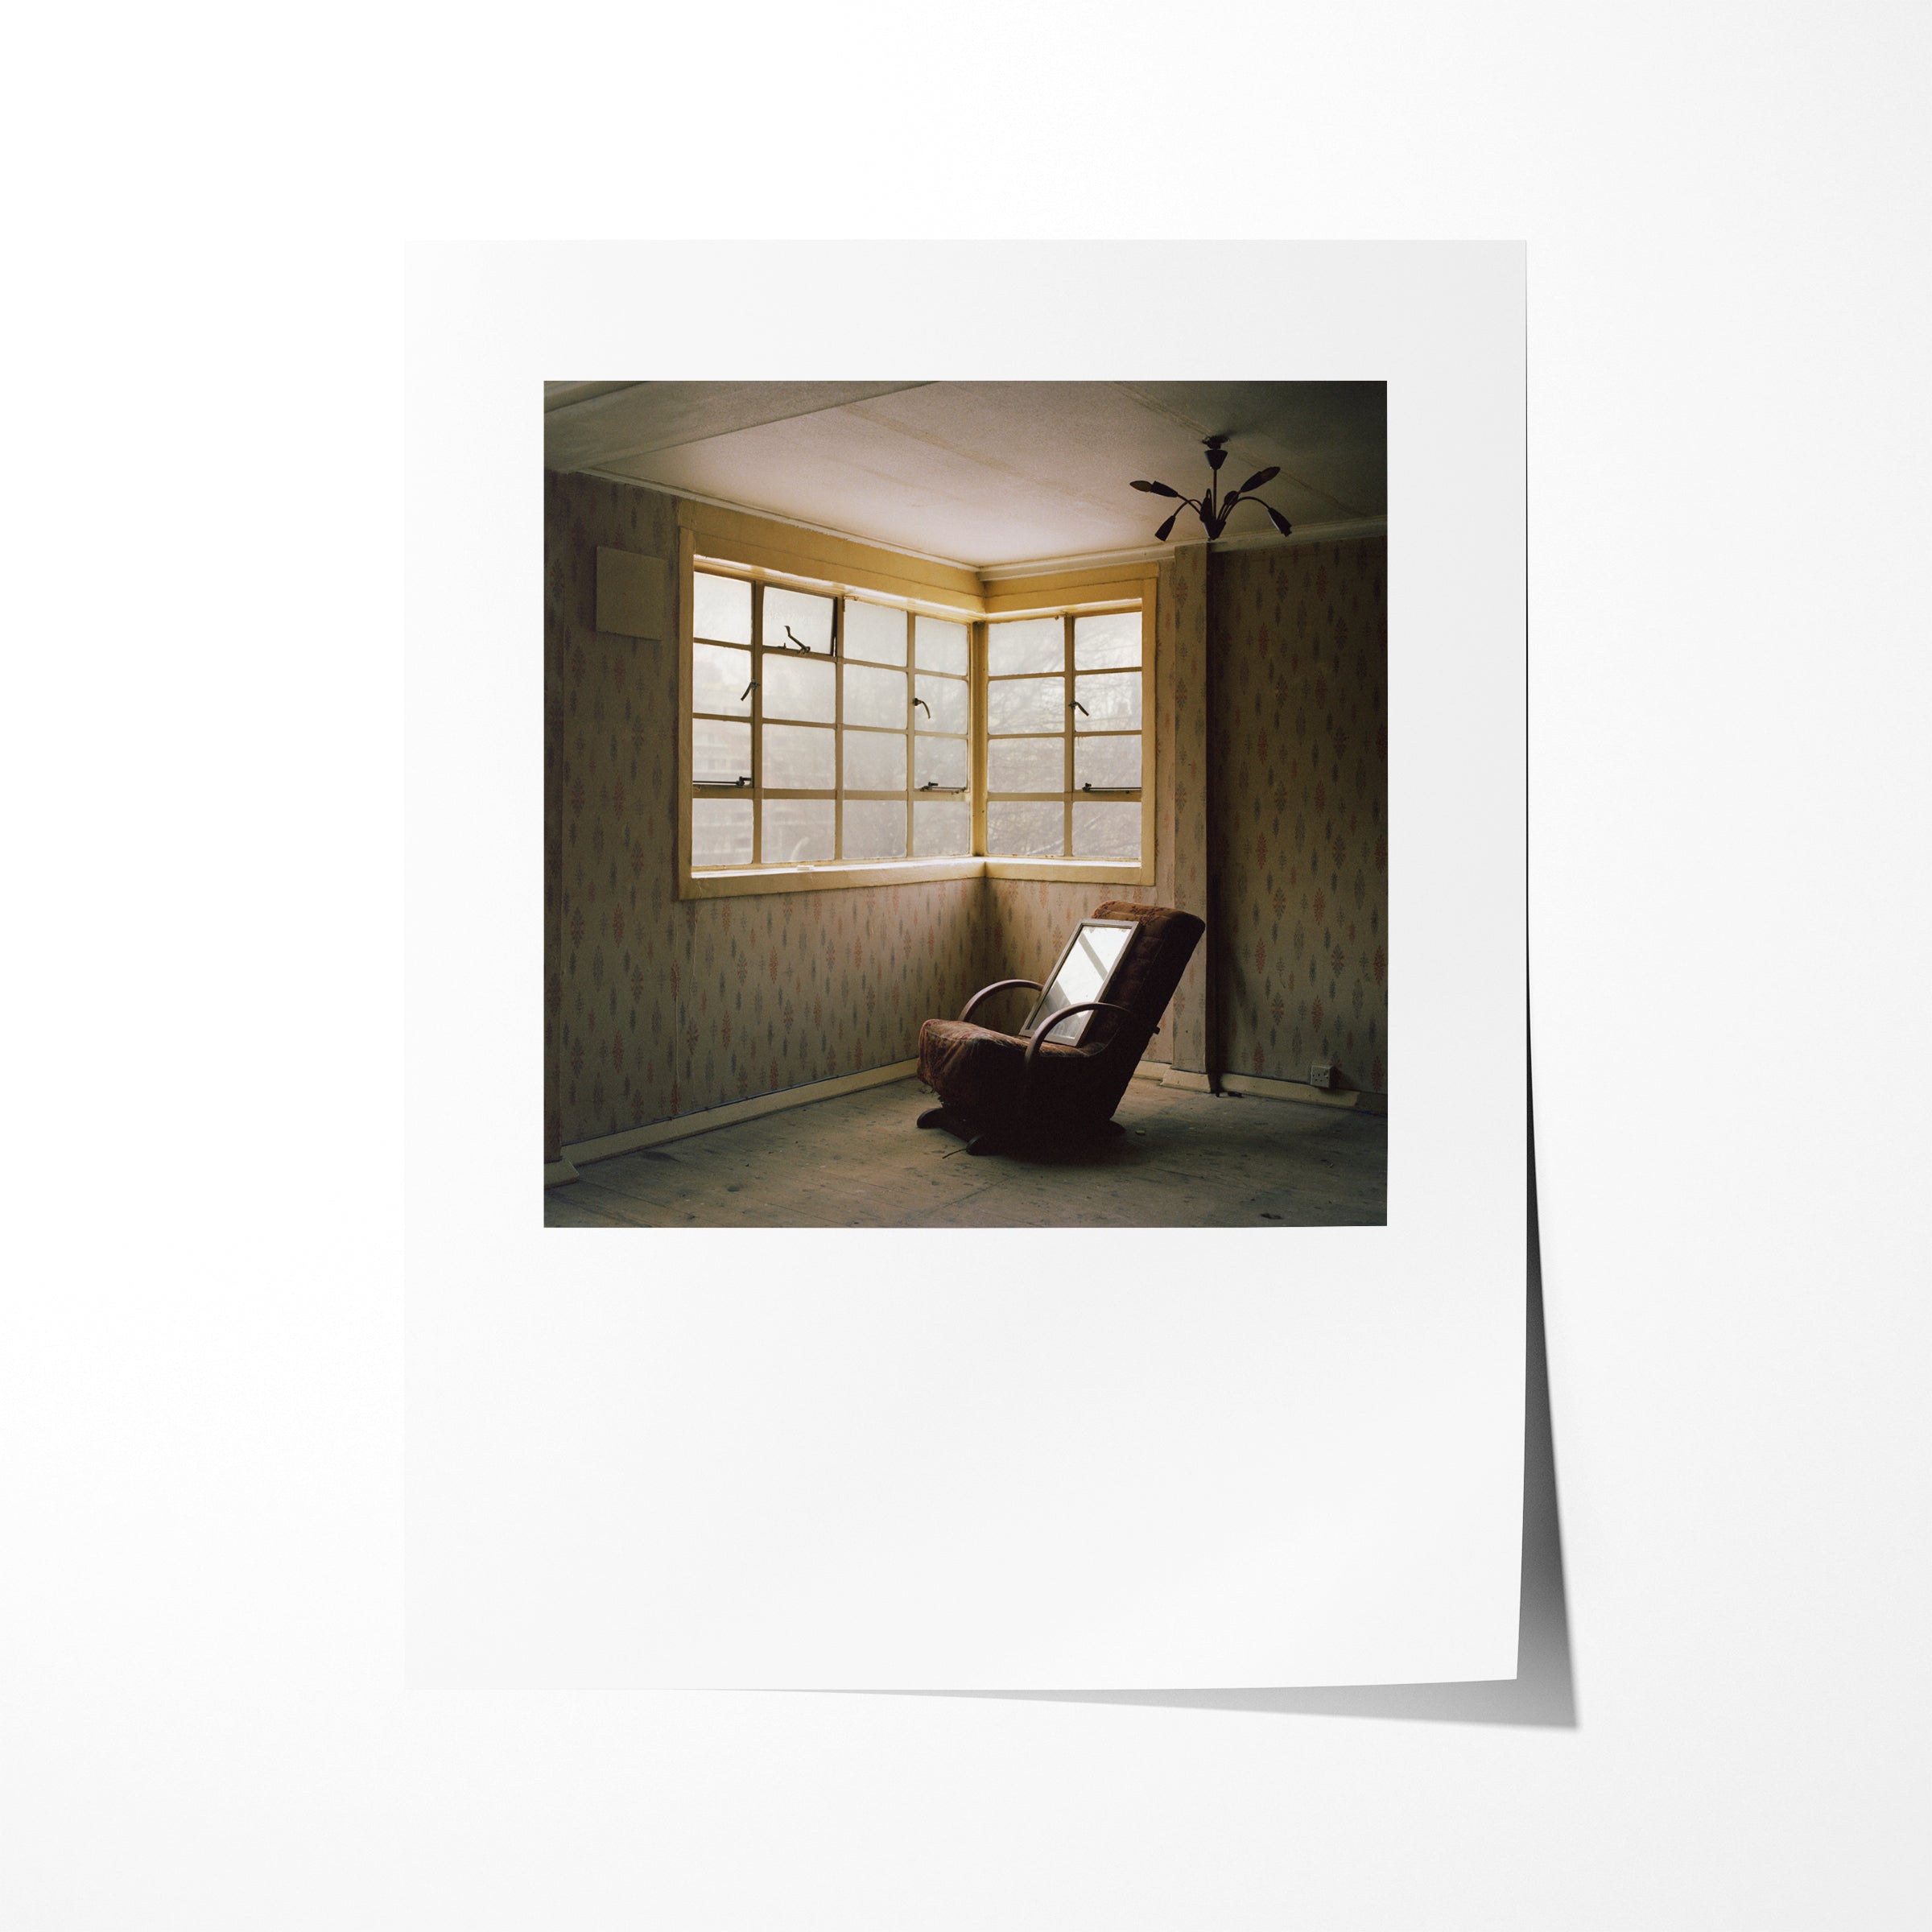 The chair, Priestly House Interior, Quarry Hill Flats, Leeds, 1978 - 7x9" Print